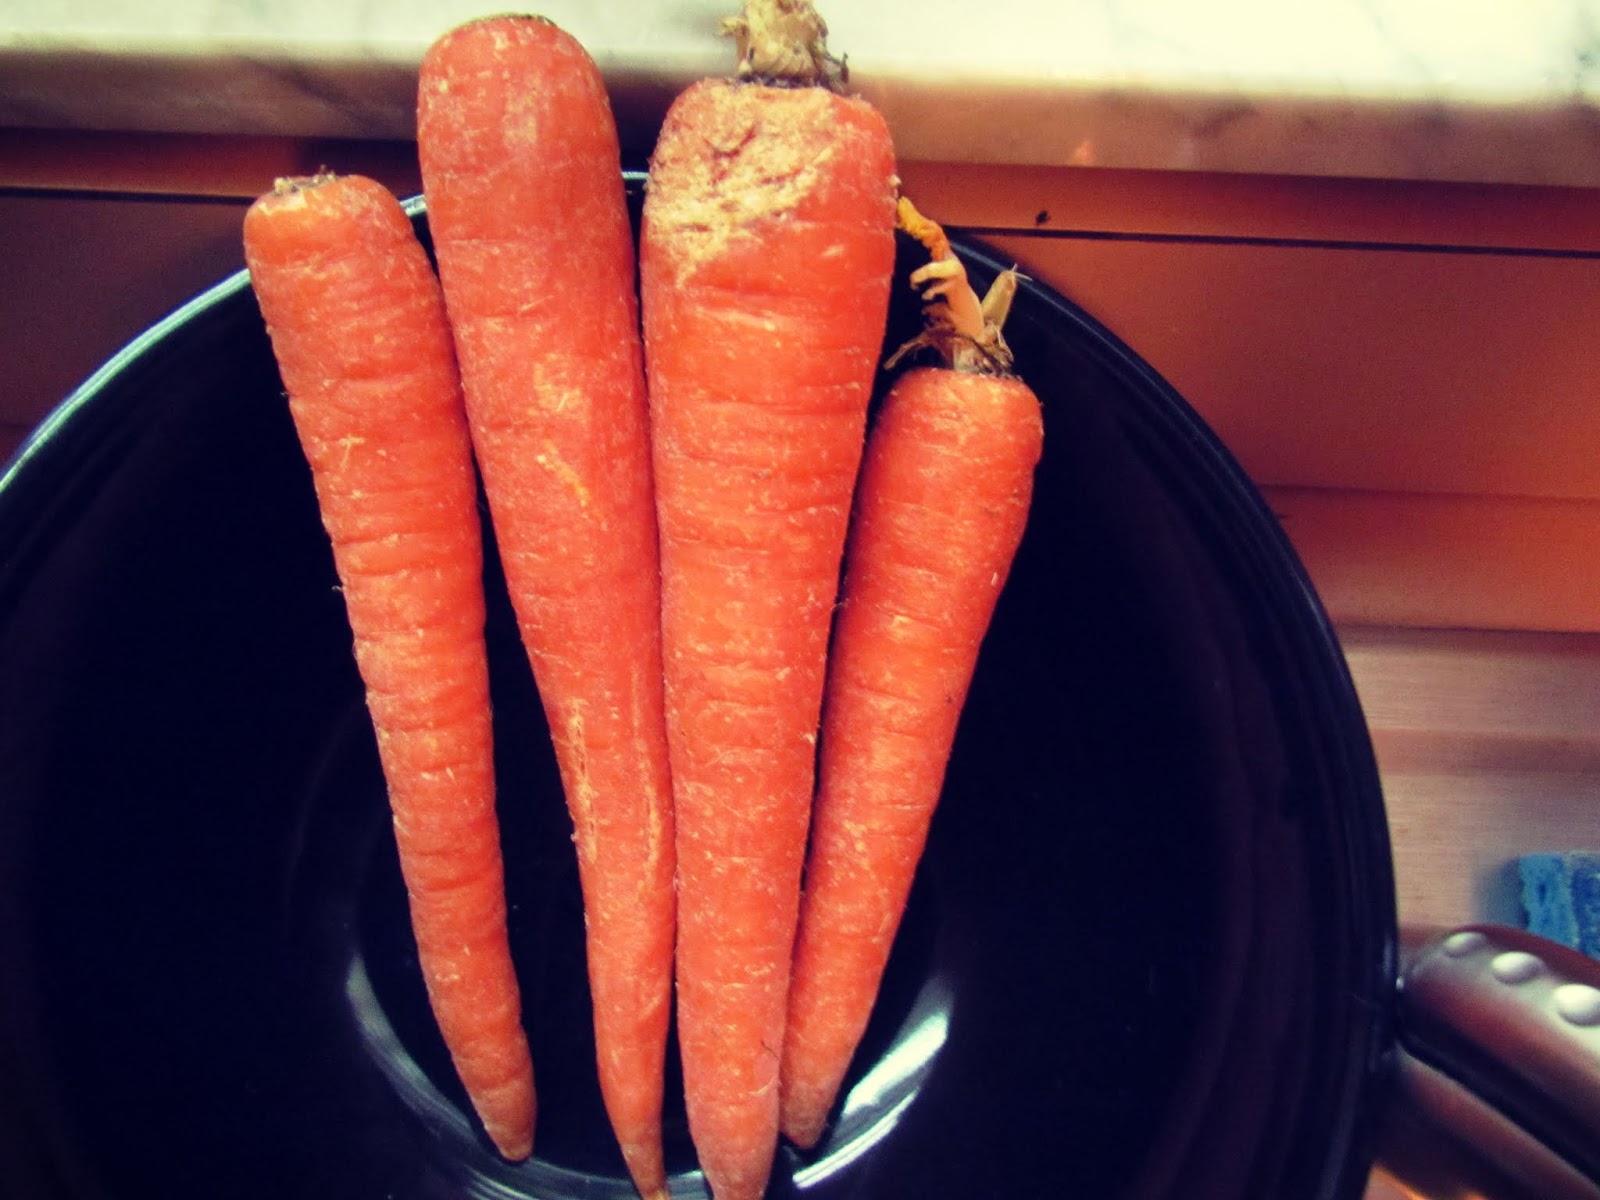 Grounding Energy With Root Vegetables For Stews and Raw Vegan Eating